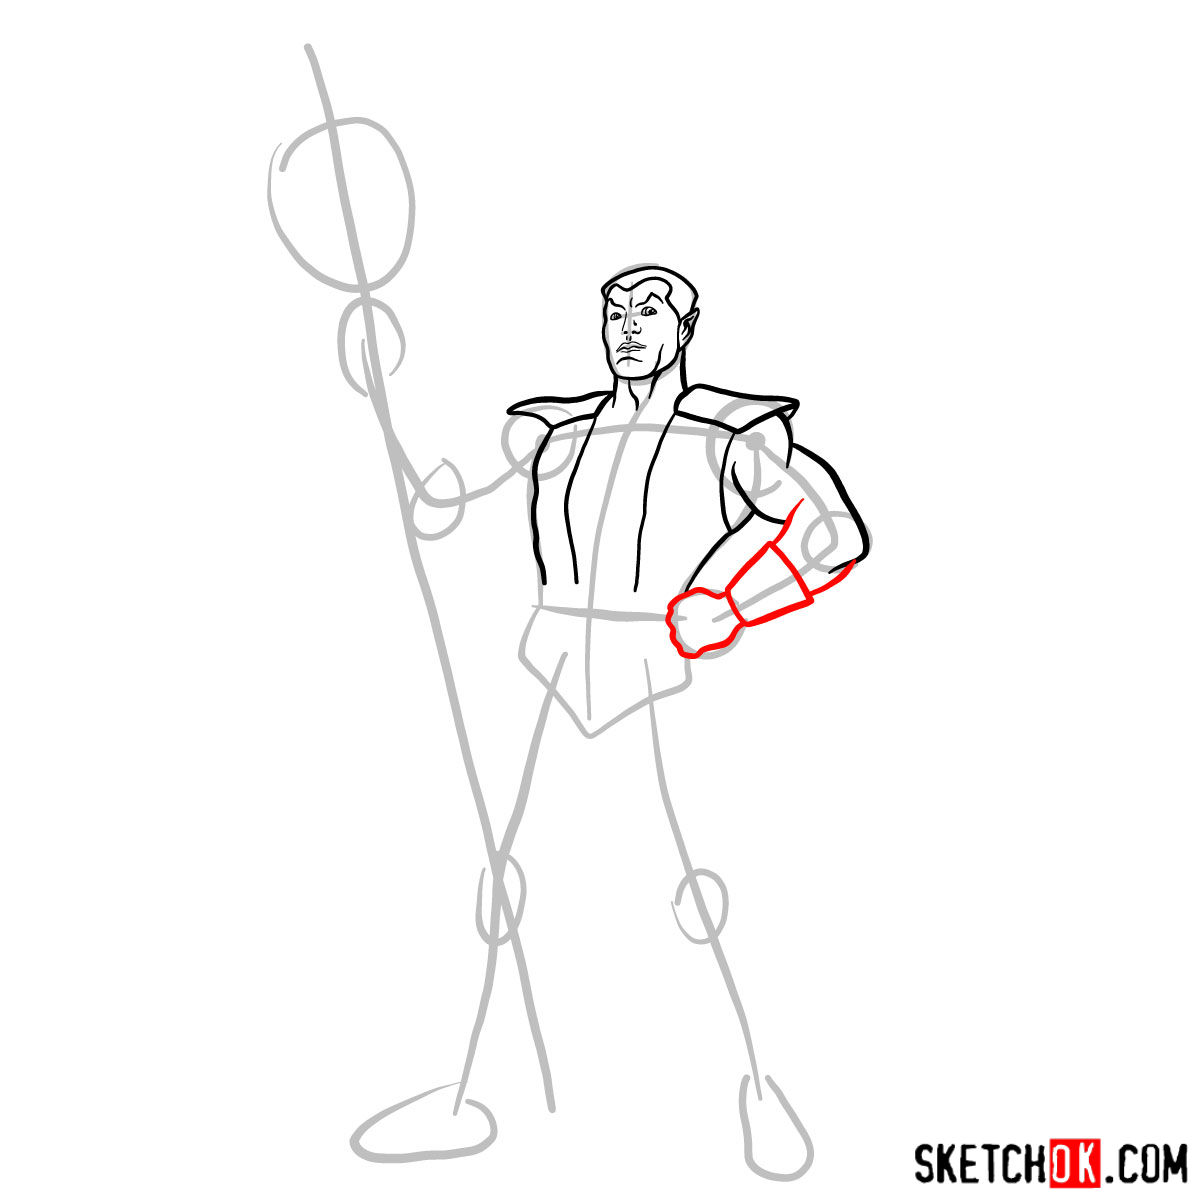 How to draw Namor the Sub-Mariner from Marvel Comics - step 07